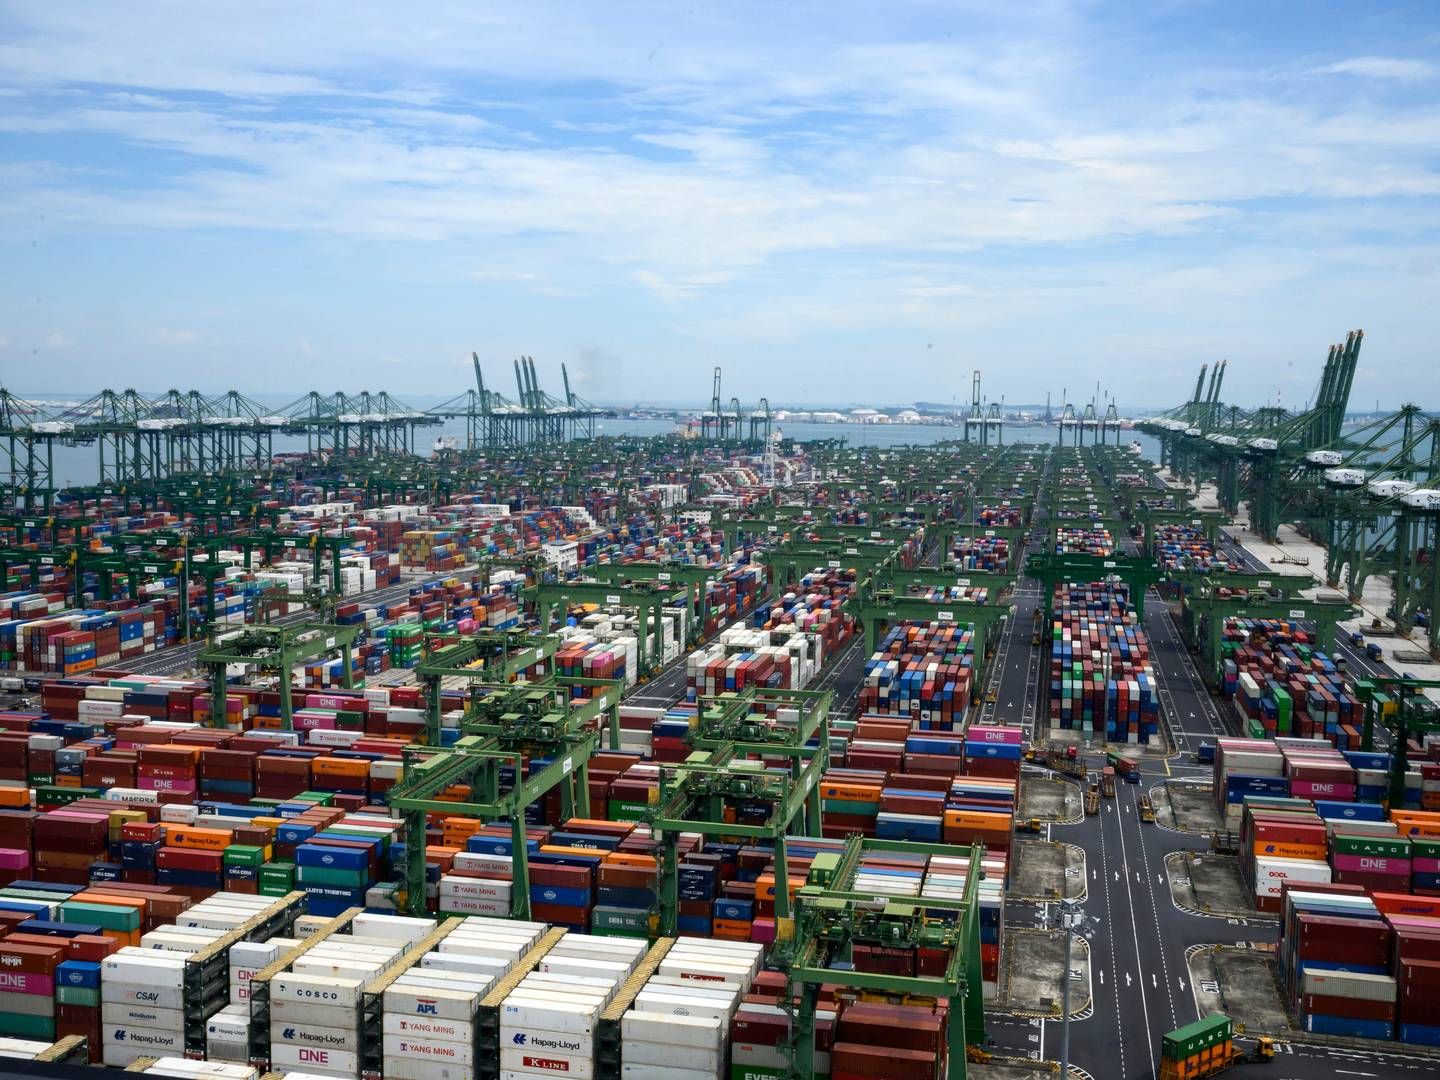 Singapore-based PSA International is one of the largest port operators in the world.